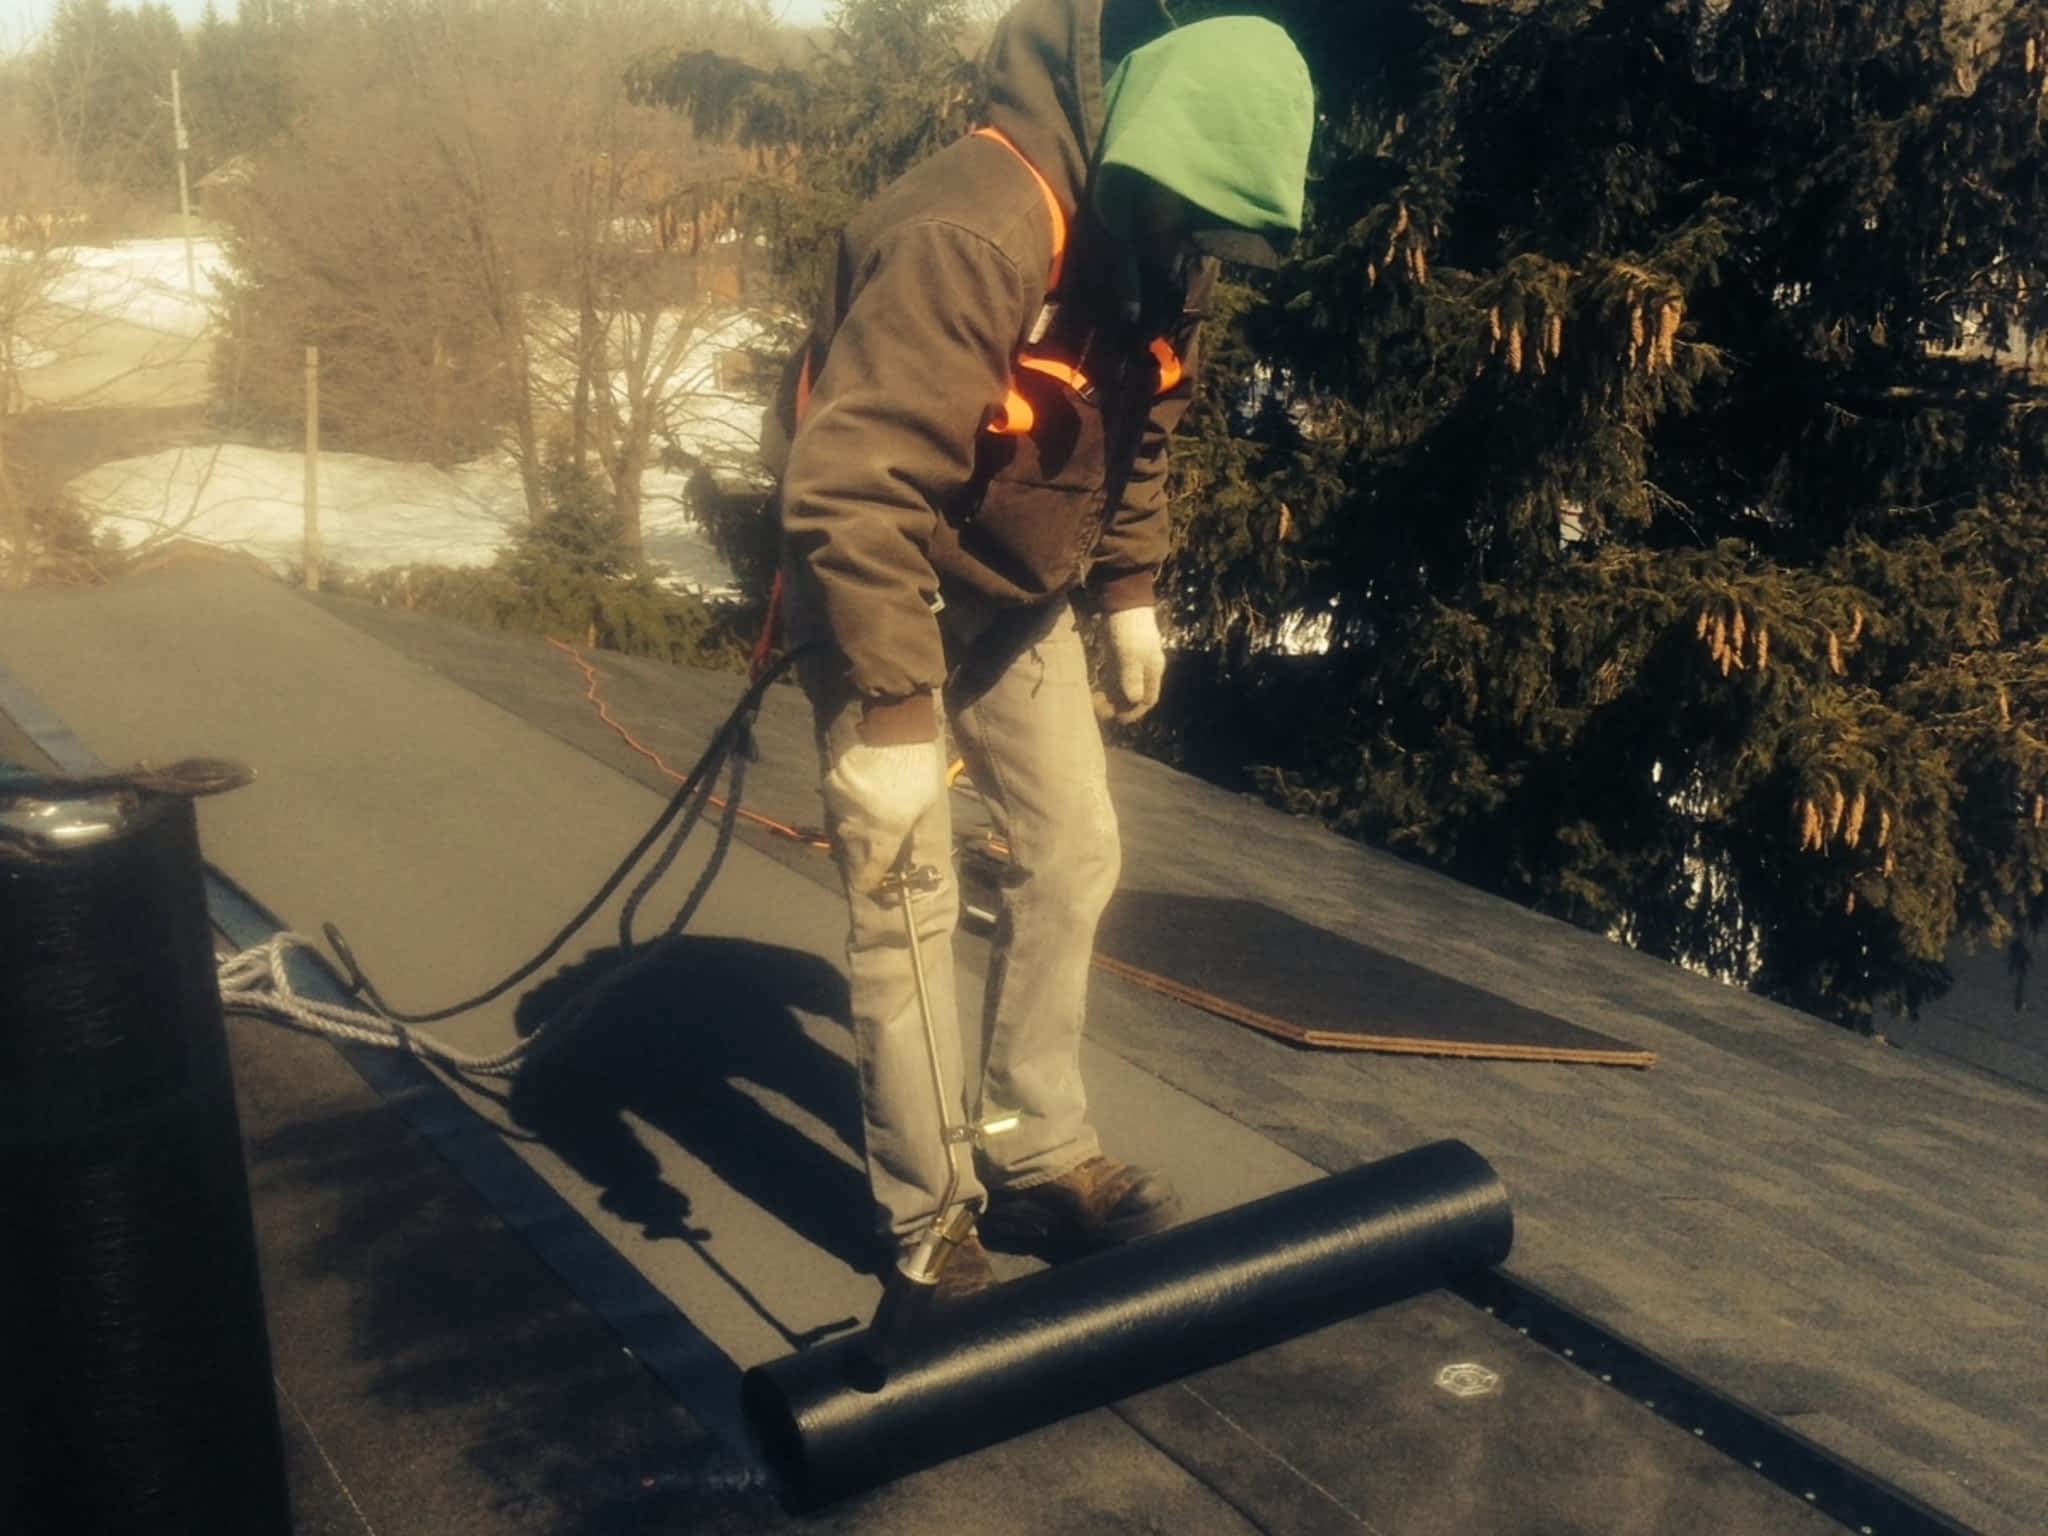 photo Quality First Roofing